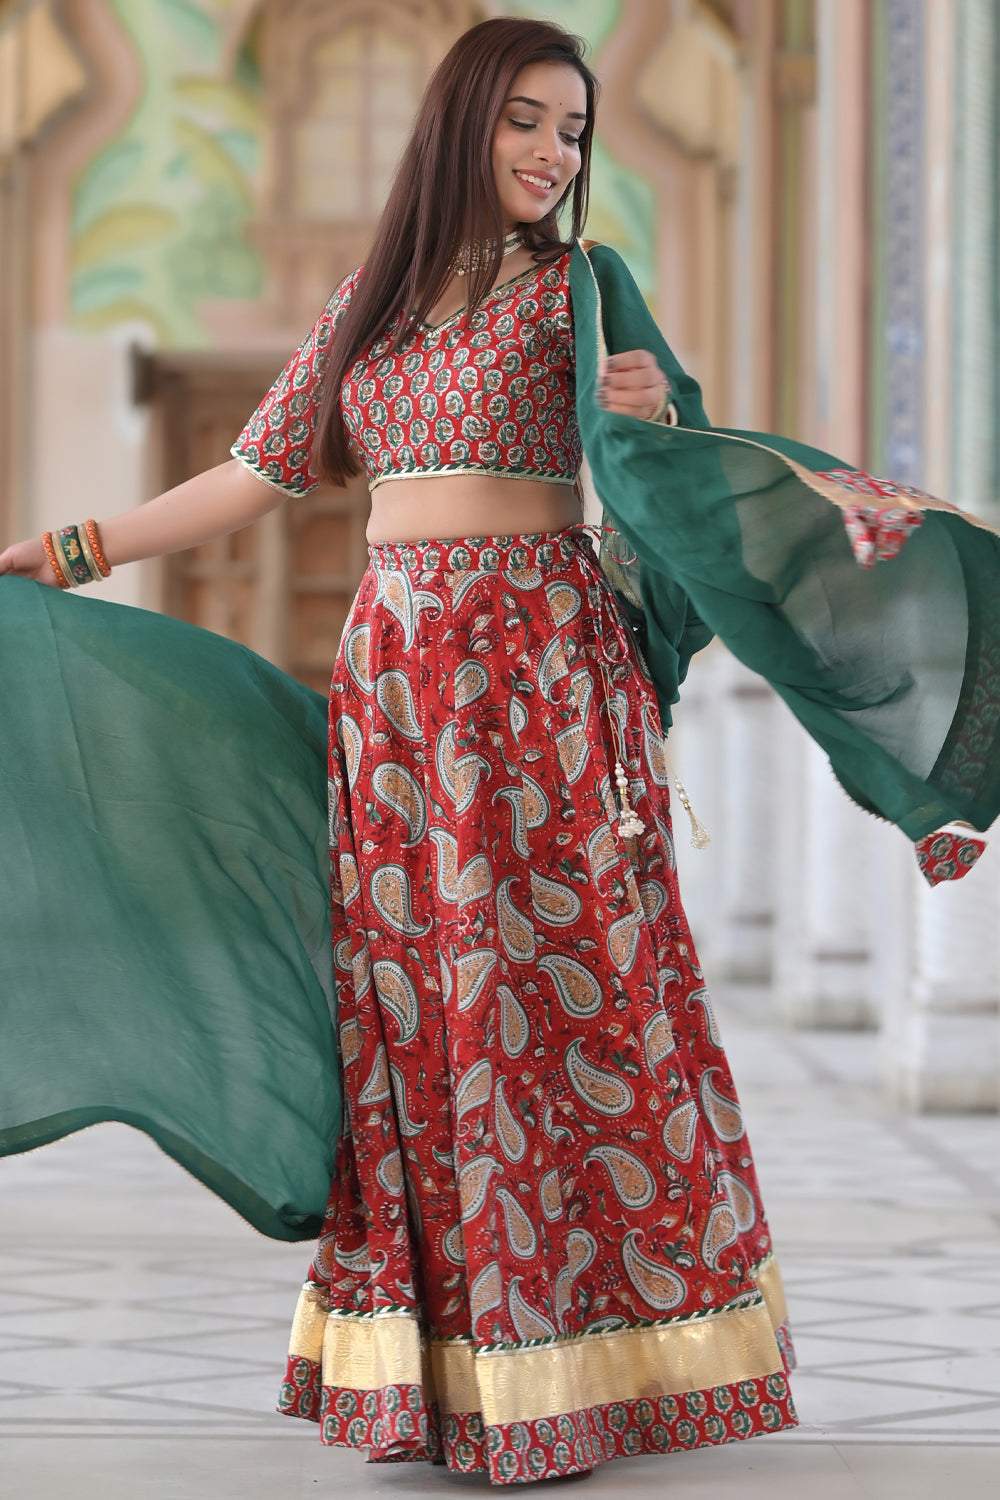 Red Paisley Lehenga handcrafted with hand block print cotton | Made To Order